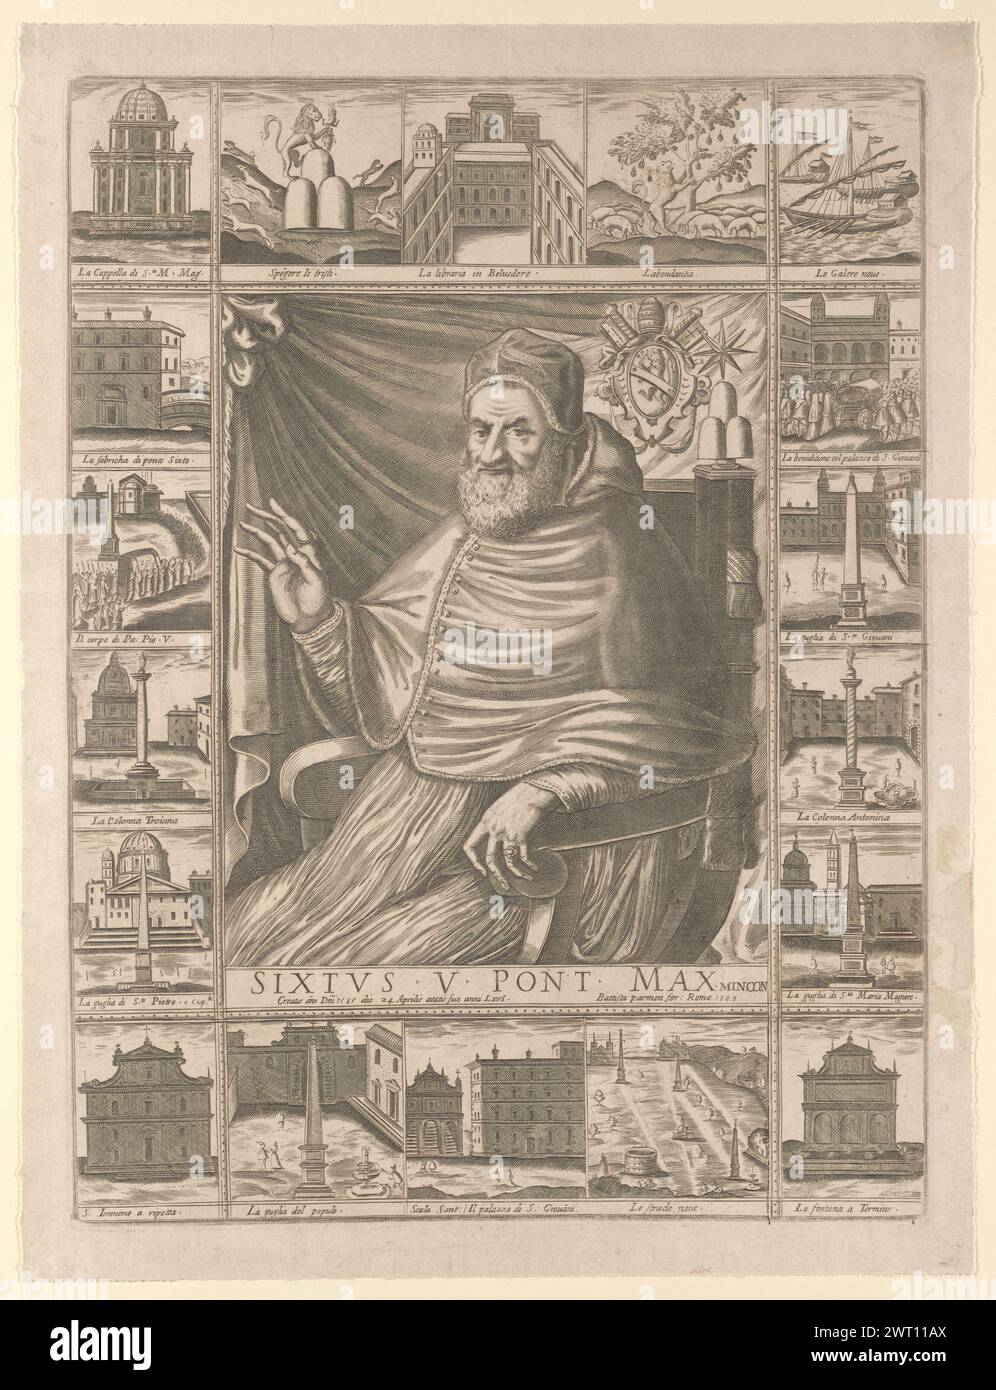 Sixtus V Pont Max min con creatus ano Dni 1585 die 24 aprilis aetatis sue anni LXVI, 1589. Pensieri, Battista. 1589 A seated portrait of Pope Sixtus V is surrounded by 16 images of his public works and two representations of his familial coat of arms. The year and the date in April of the Pope's consecration, as well as the year of production appear to have been added to the print after the plate was initially executed. With Pecci-Blunt's collector's marks, in black ink, on the verso. Imprint: Rome. Anna Laetitia Pecci-Blunt collected prints, published works, drawings and paintings thematicall Stock Photo